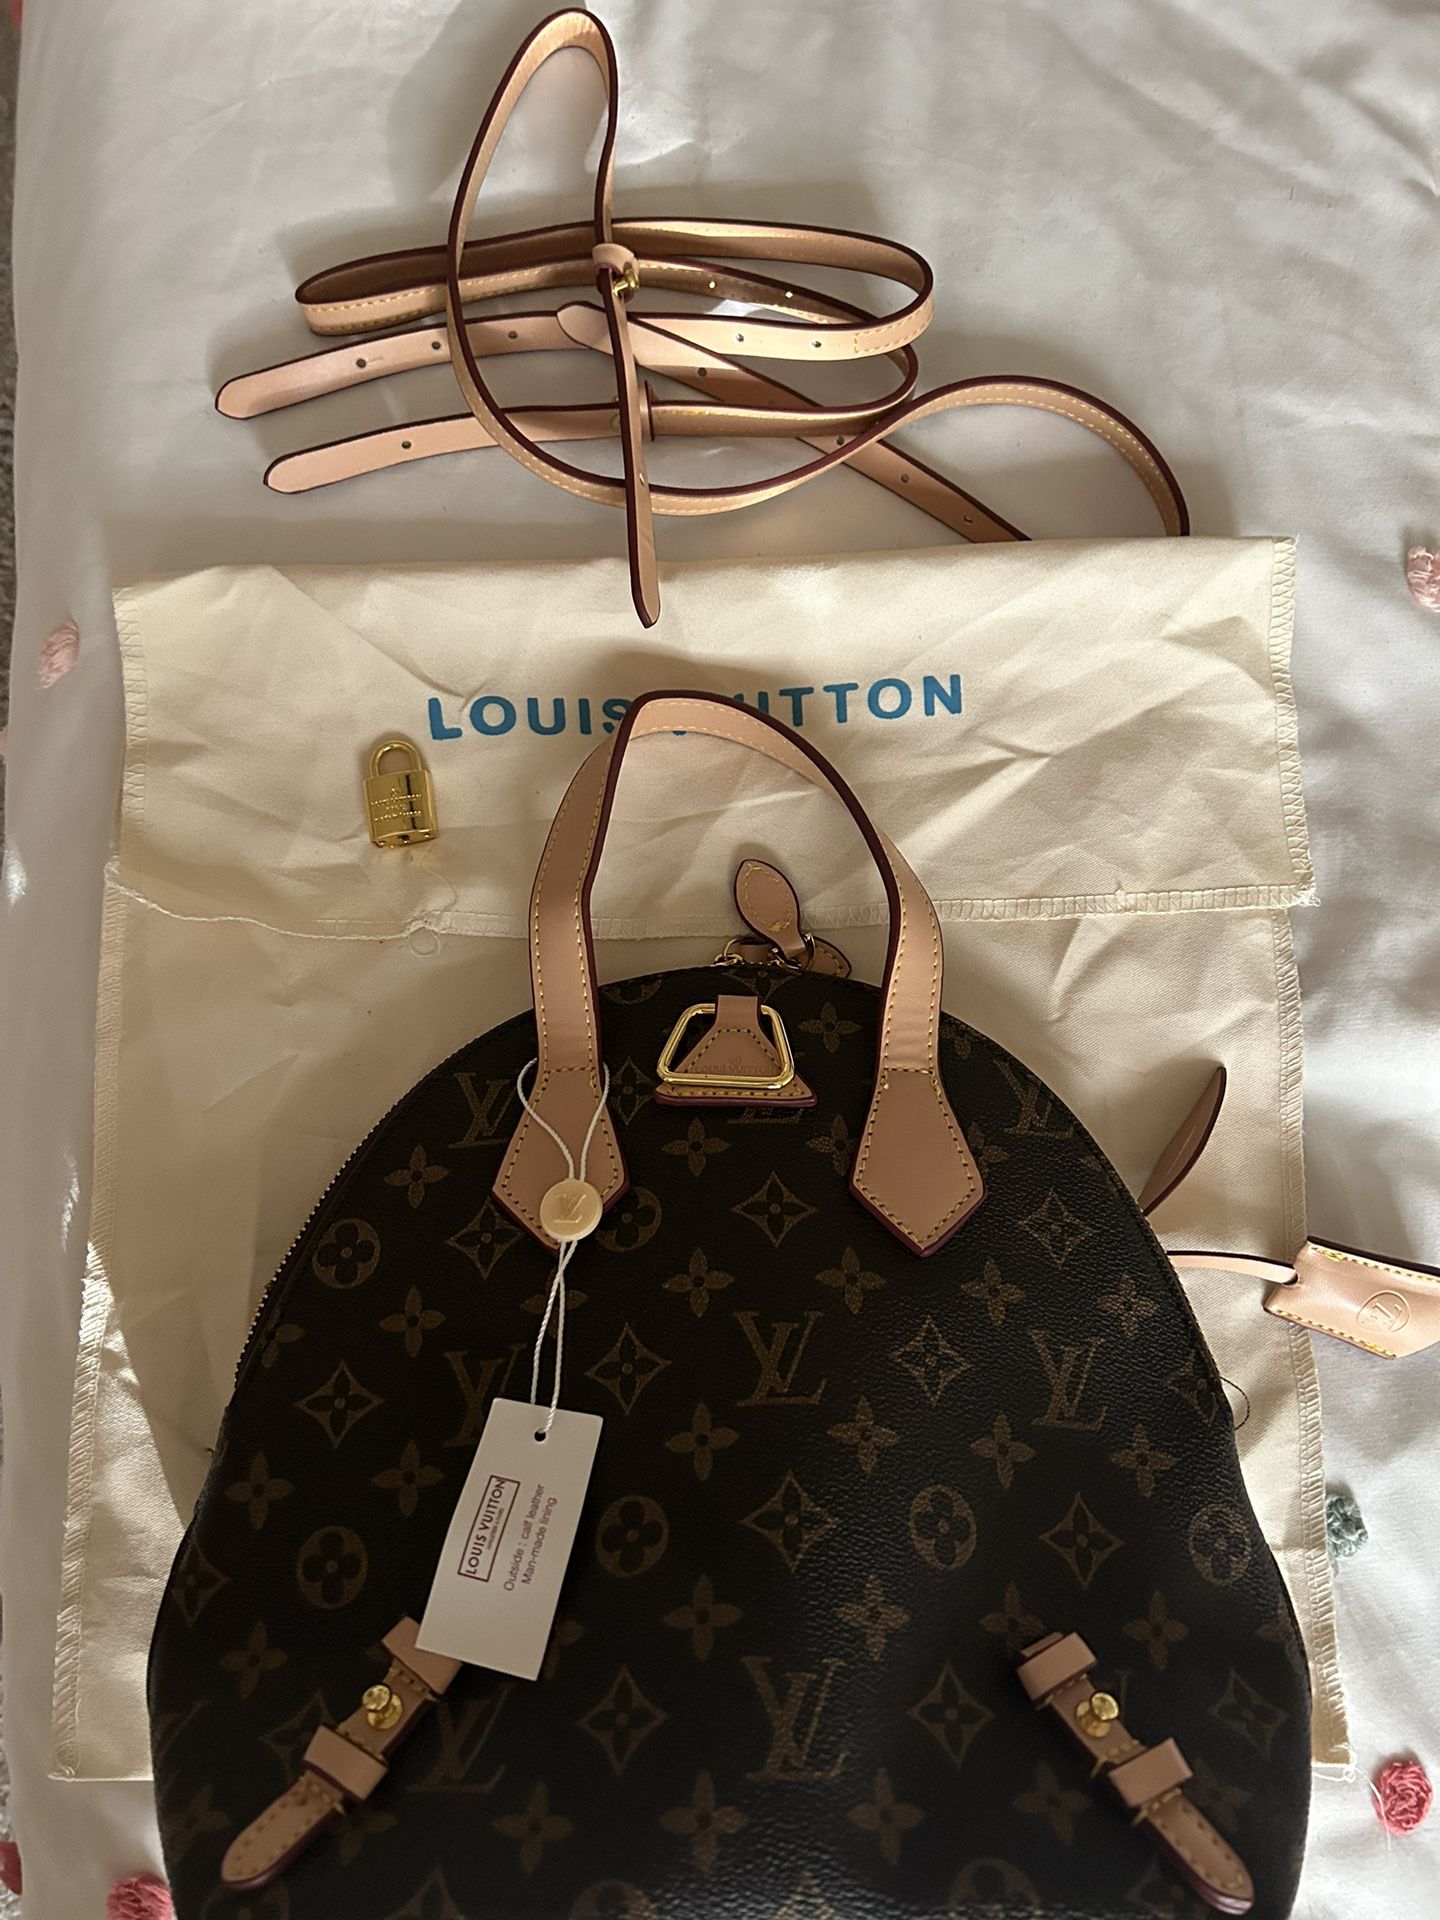 authentic louis vuitton backpack